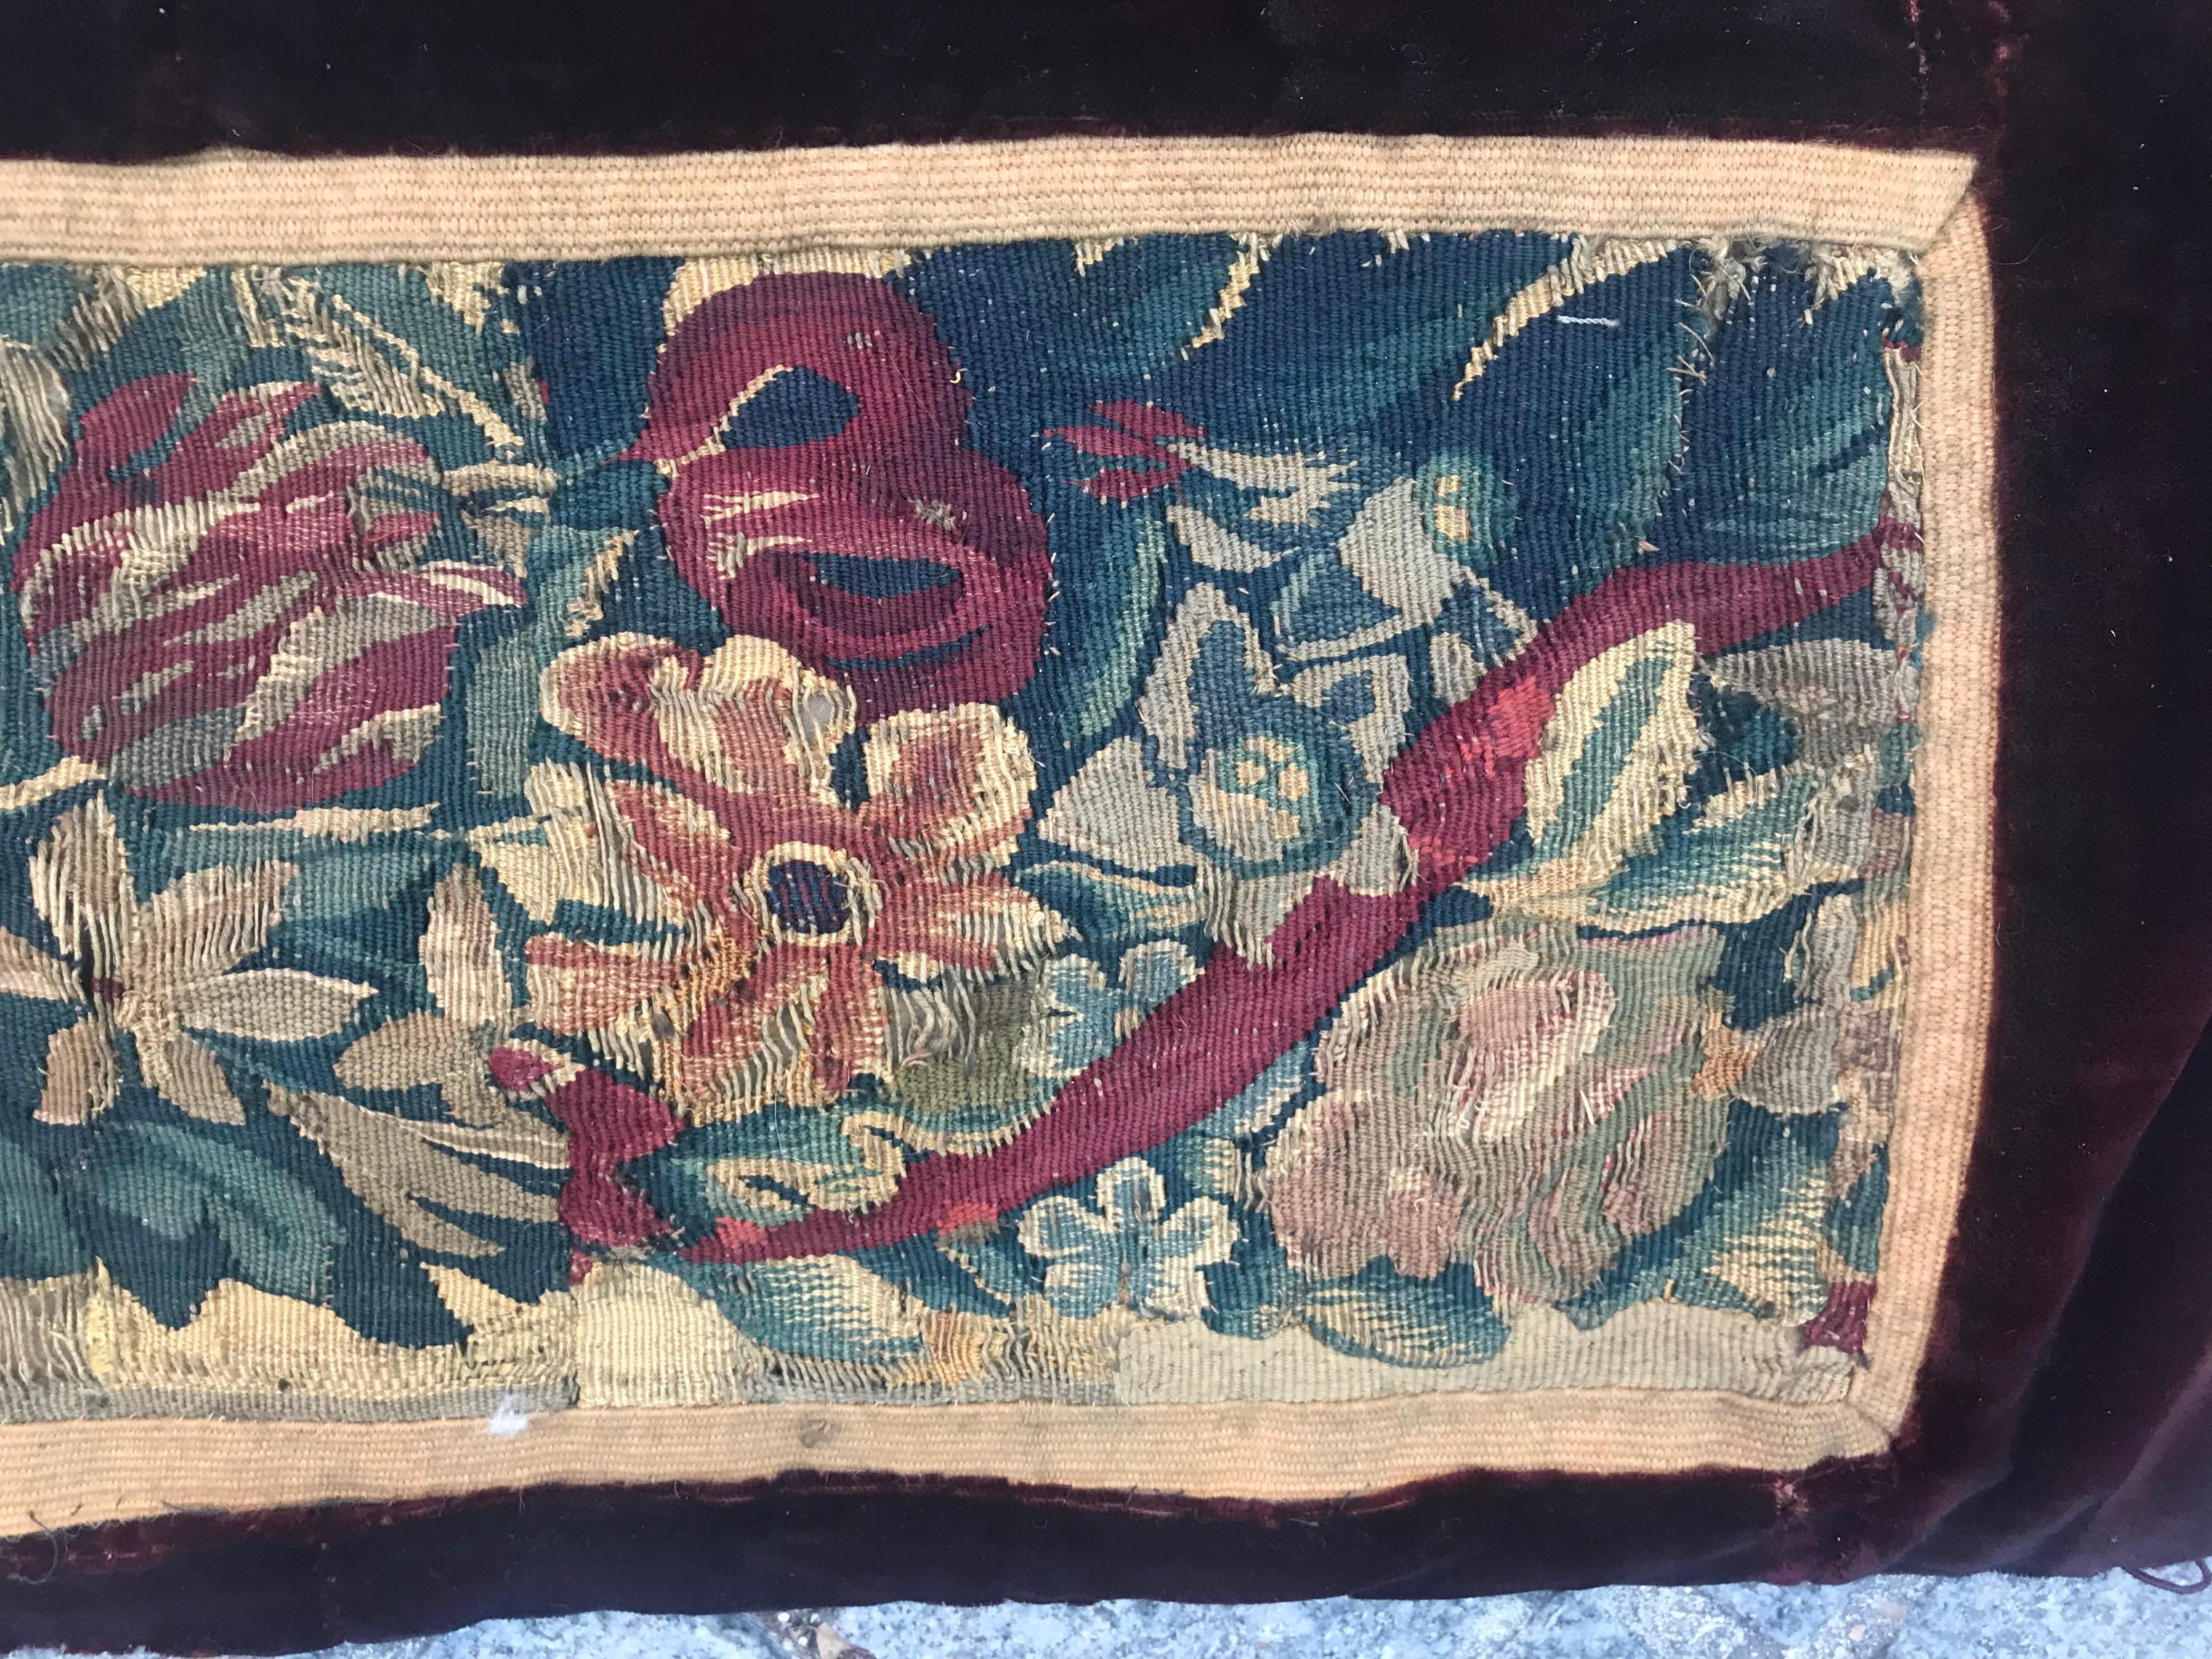 Beautiful Aubusson border tapestry, from 18th century, with nice floral design, applied on velvet foundation, entirely handwoven with silk and wool.